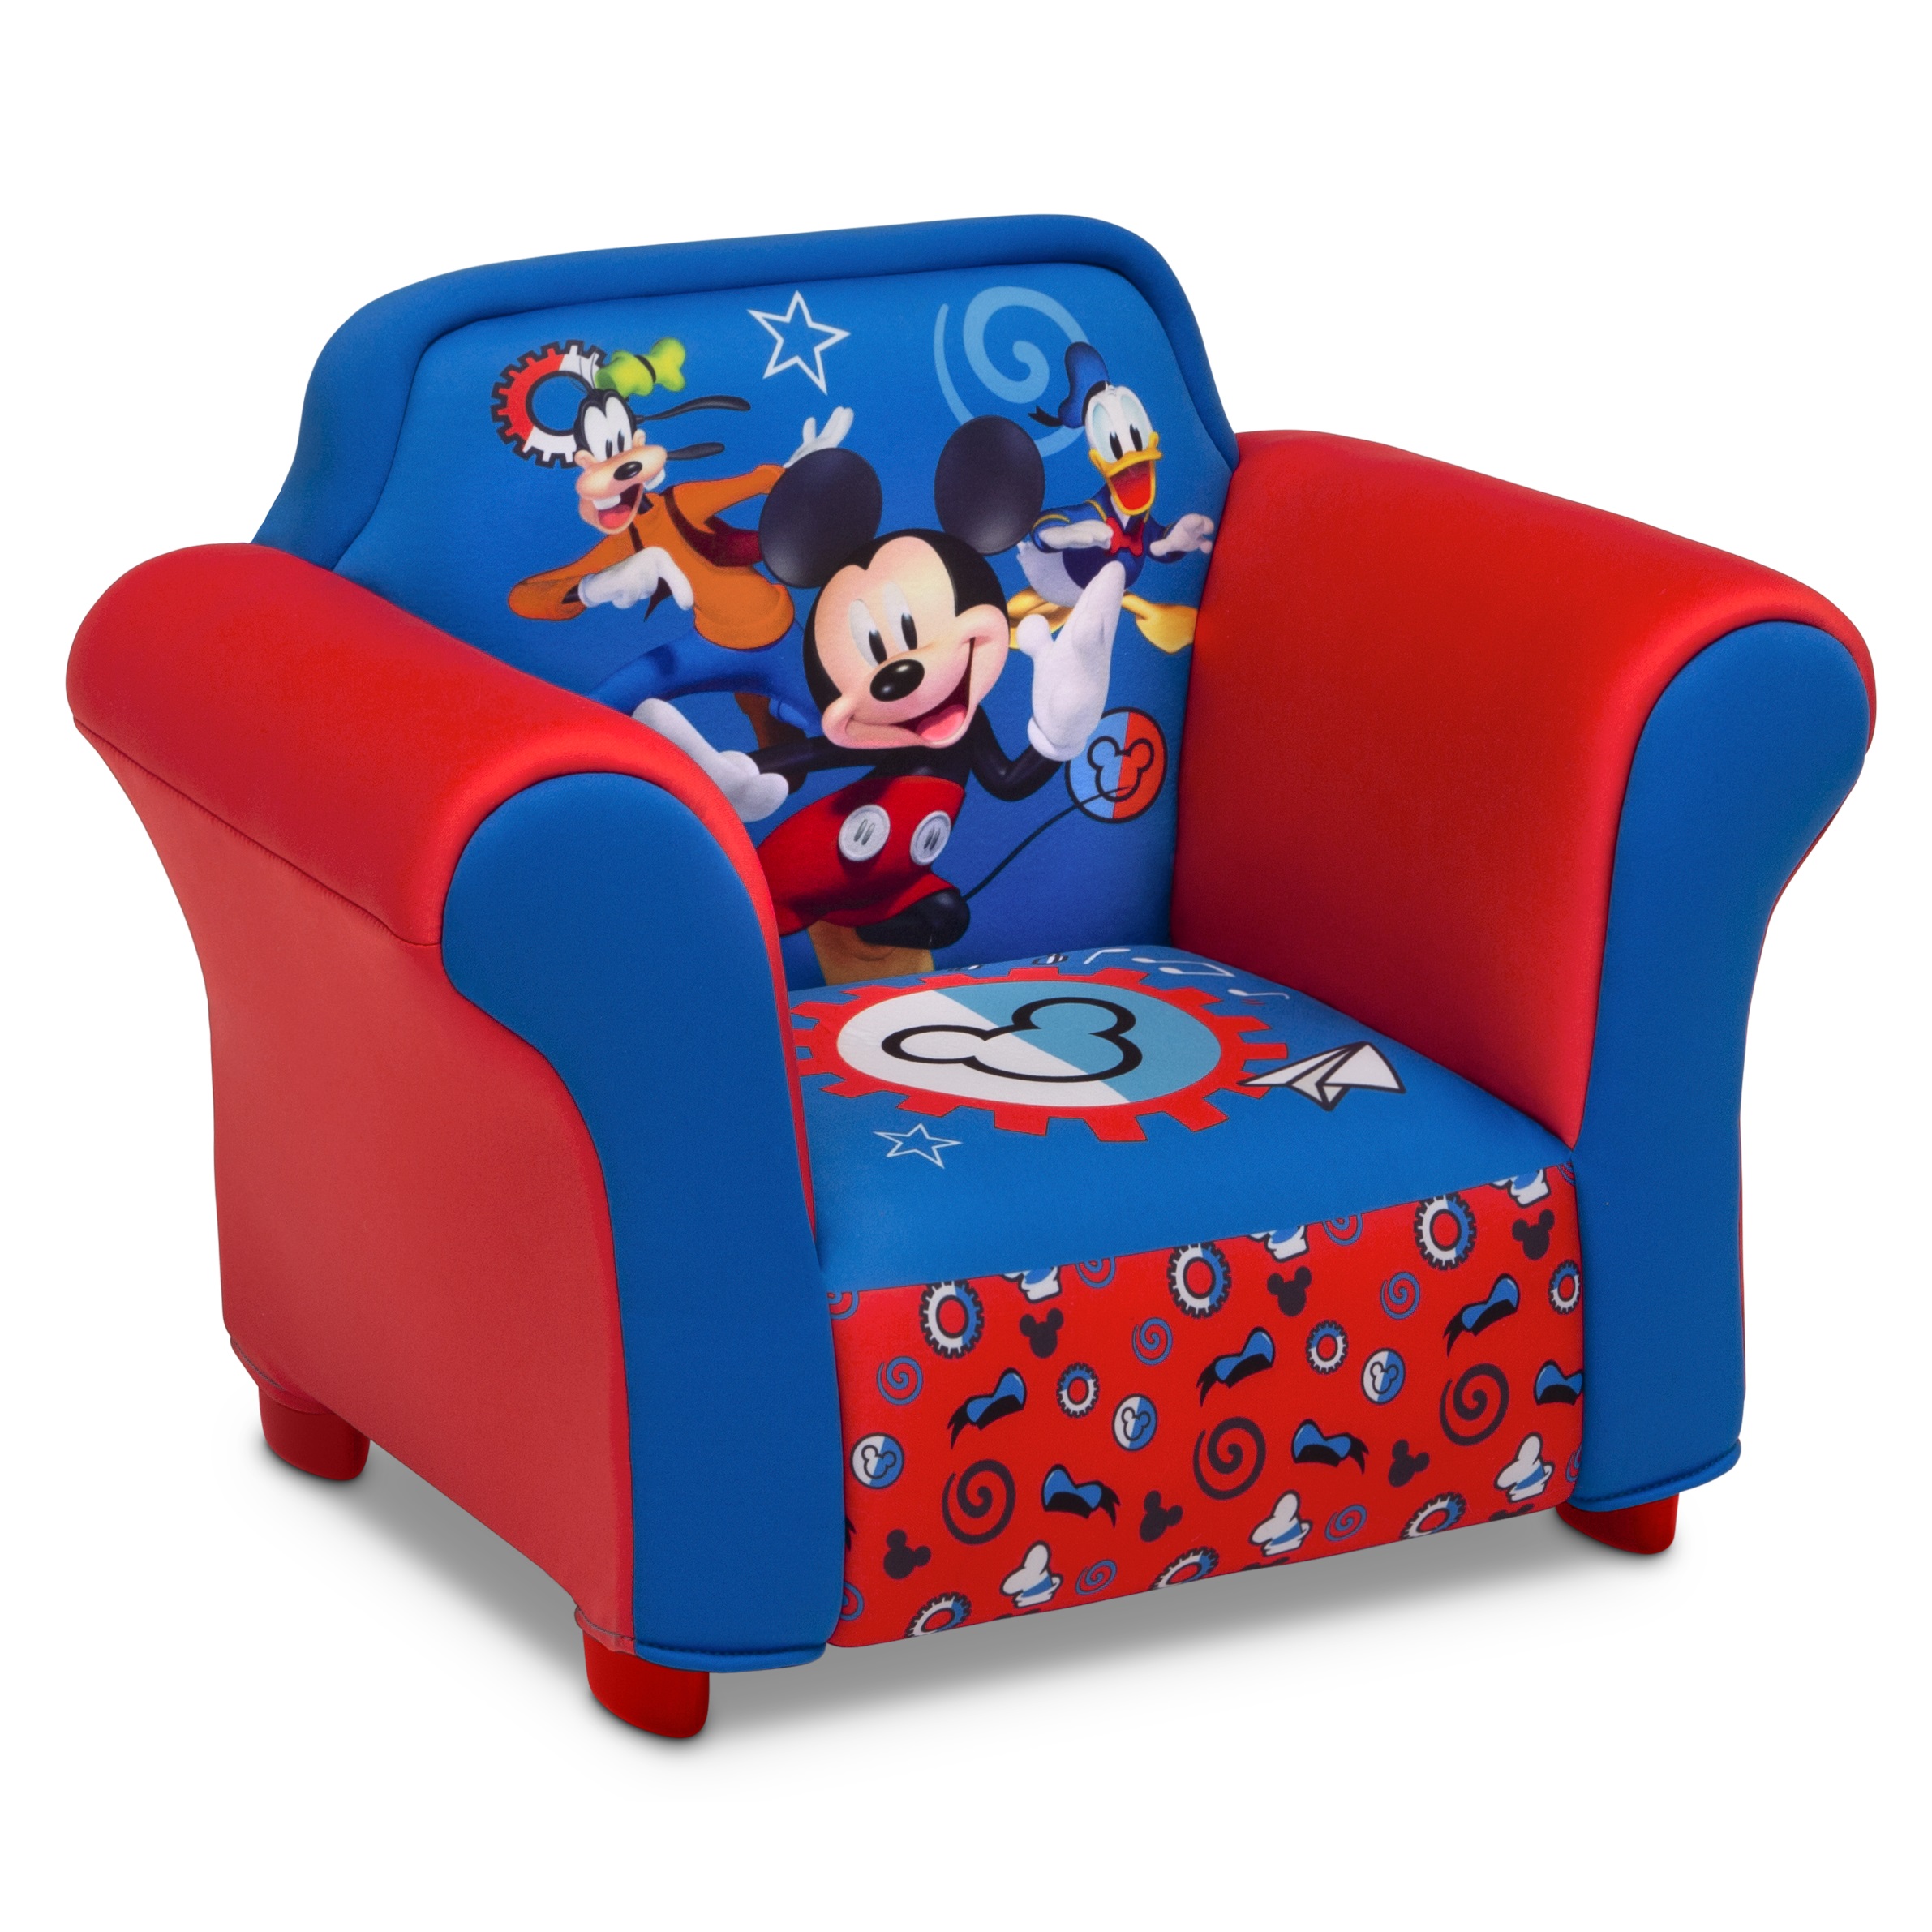 Disney Mickey Mouse Kids Upholstered Chair with Sculpted Plastic Frame by Delta Children - image 4 of 6